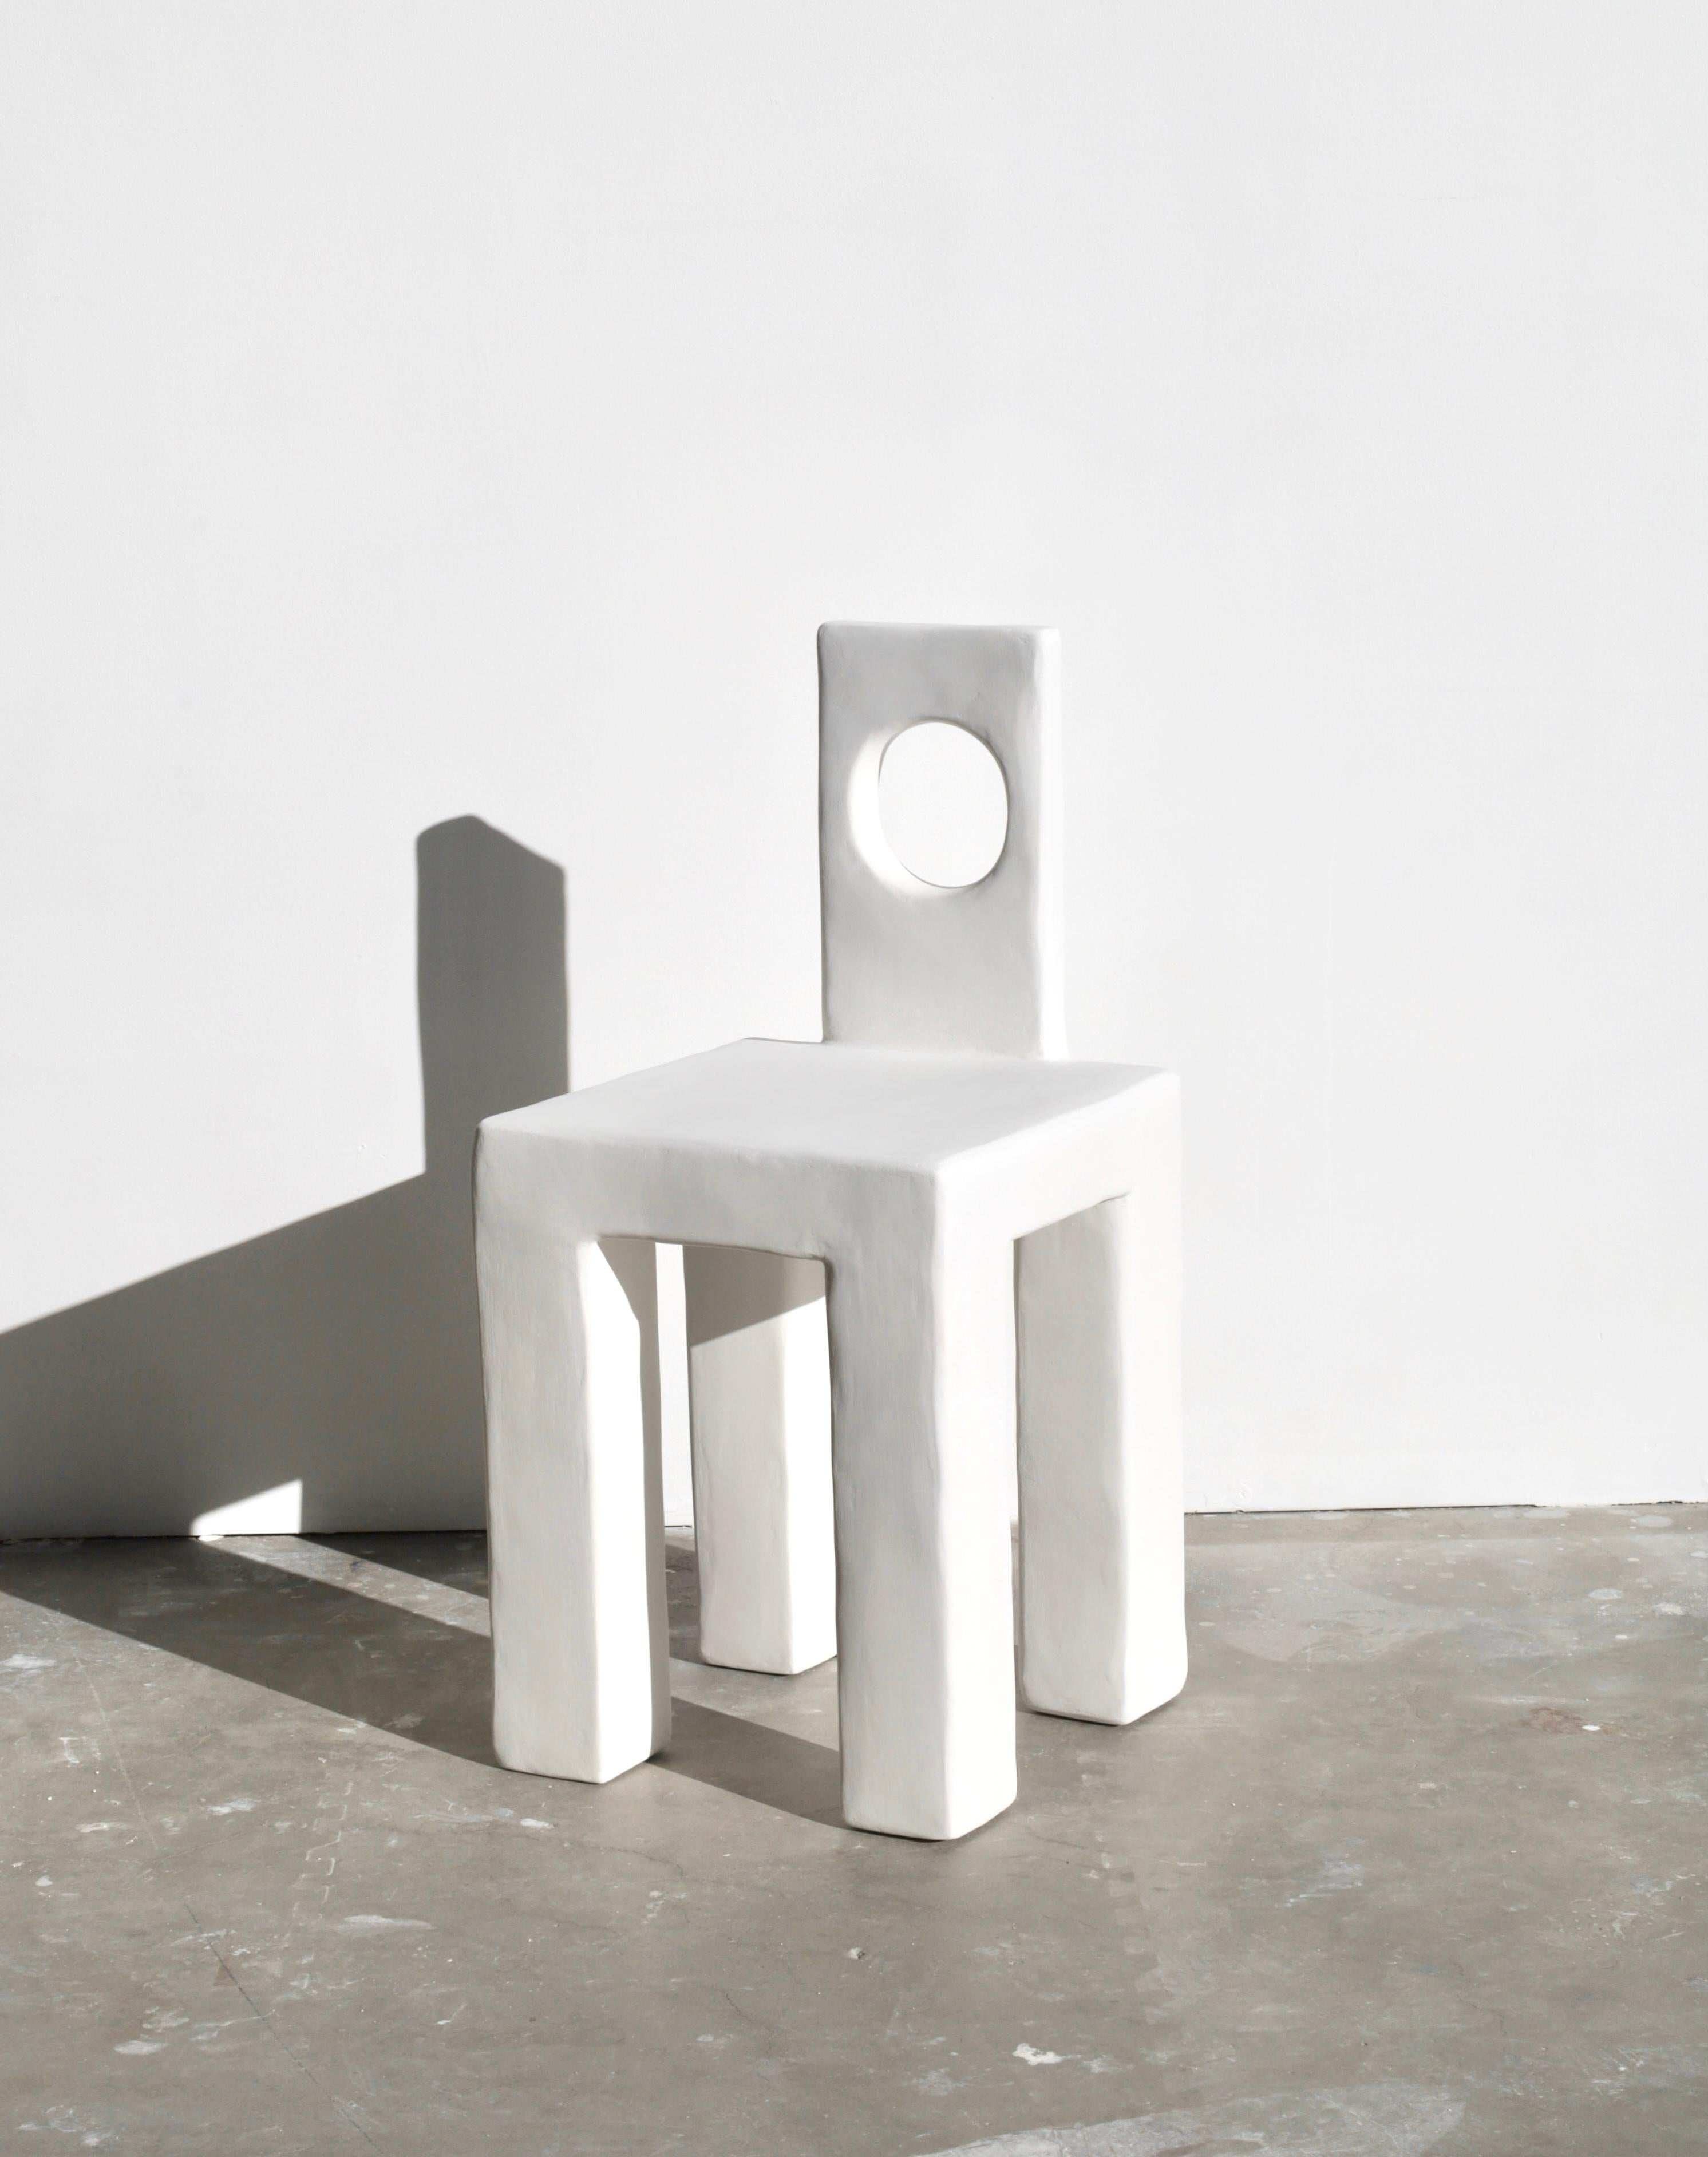 Art object created for use, designed to serve a purpose and with an aesthetic in mind

the eyelet-style back and four chunky legs create a sculptural Minimalist design.
each chair is custom made, therefore, the shape will differ from piece to